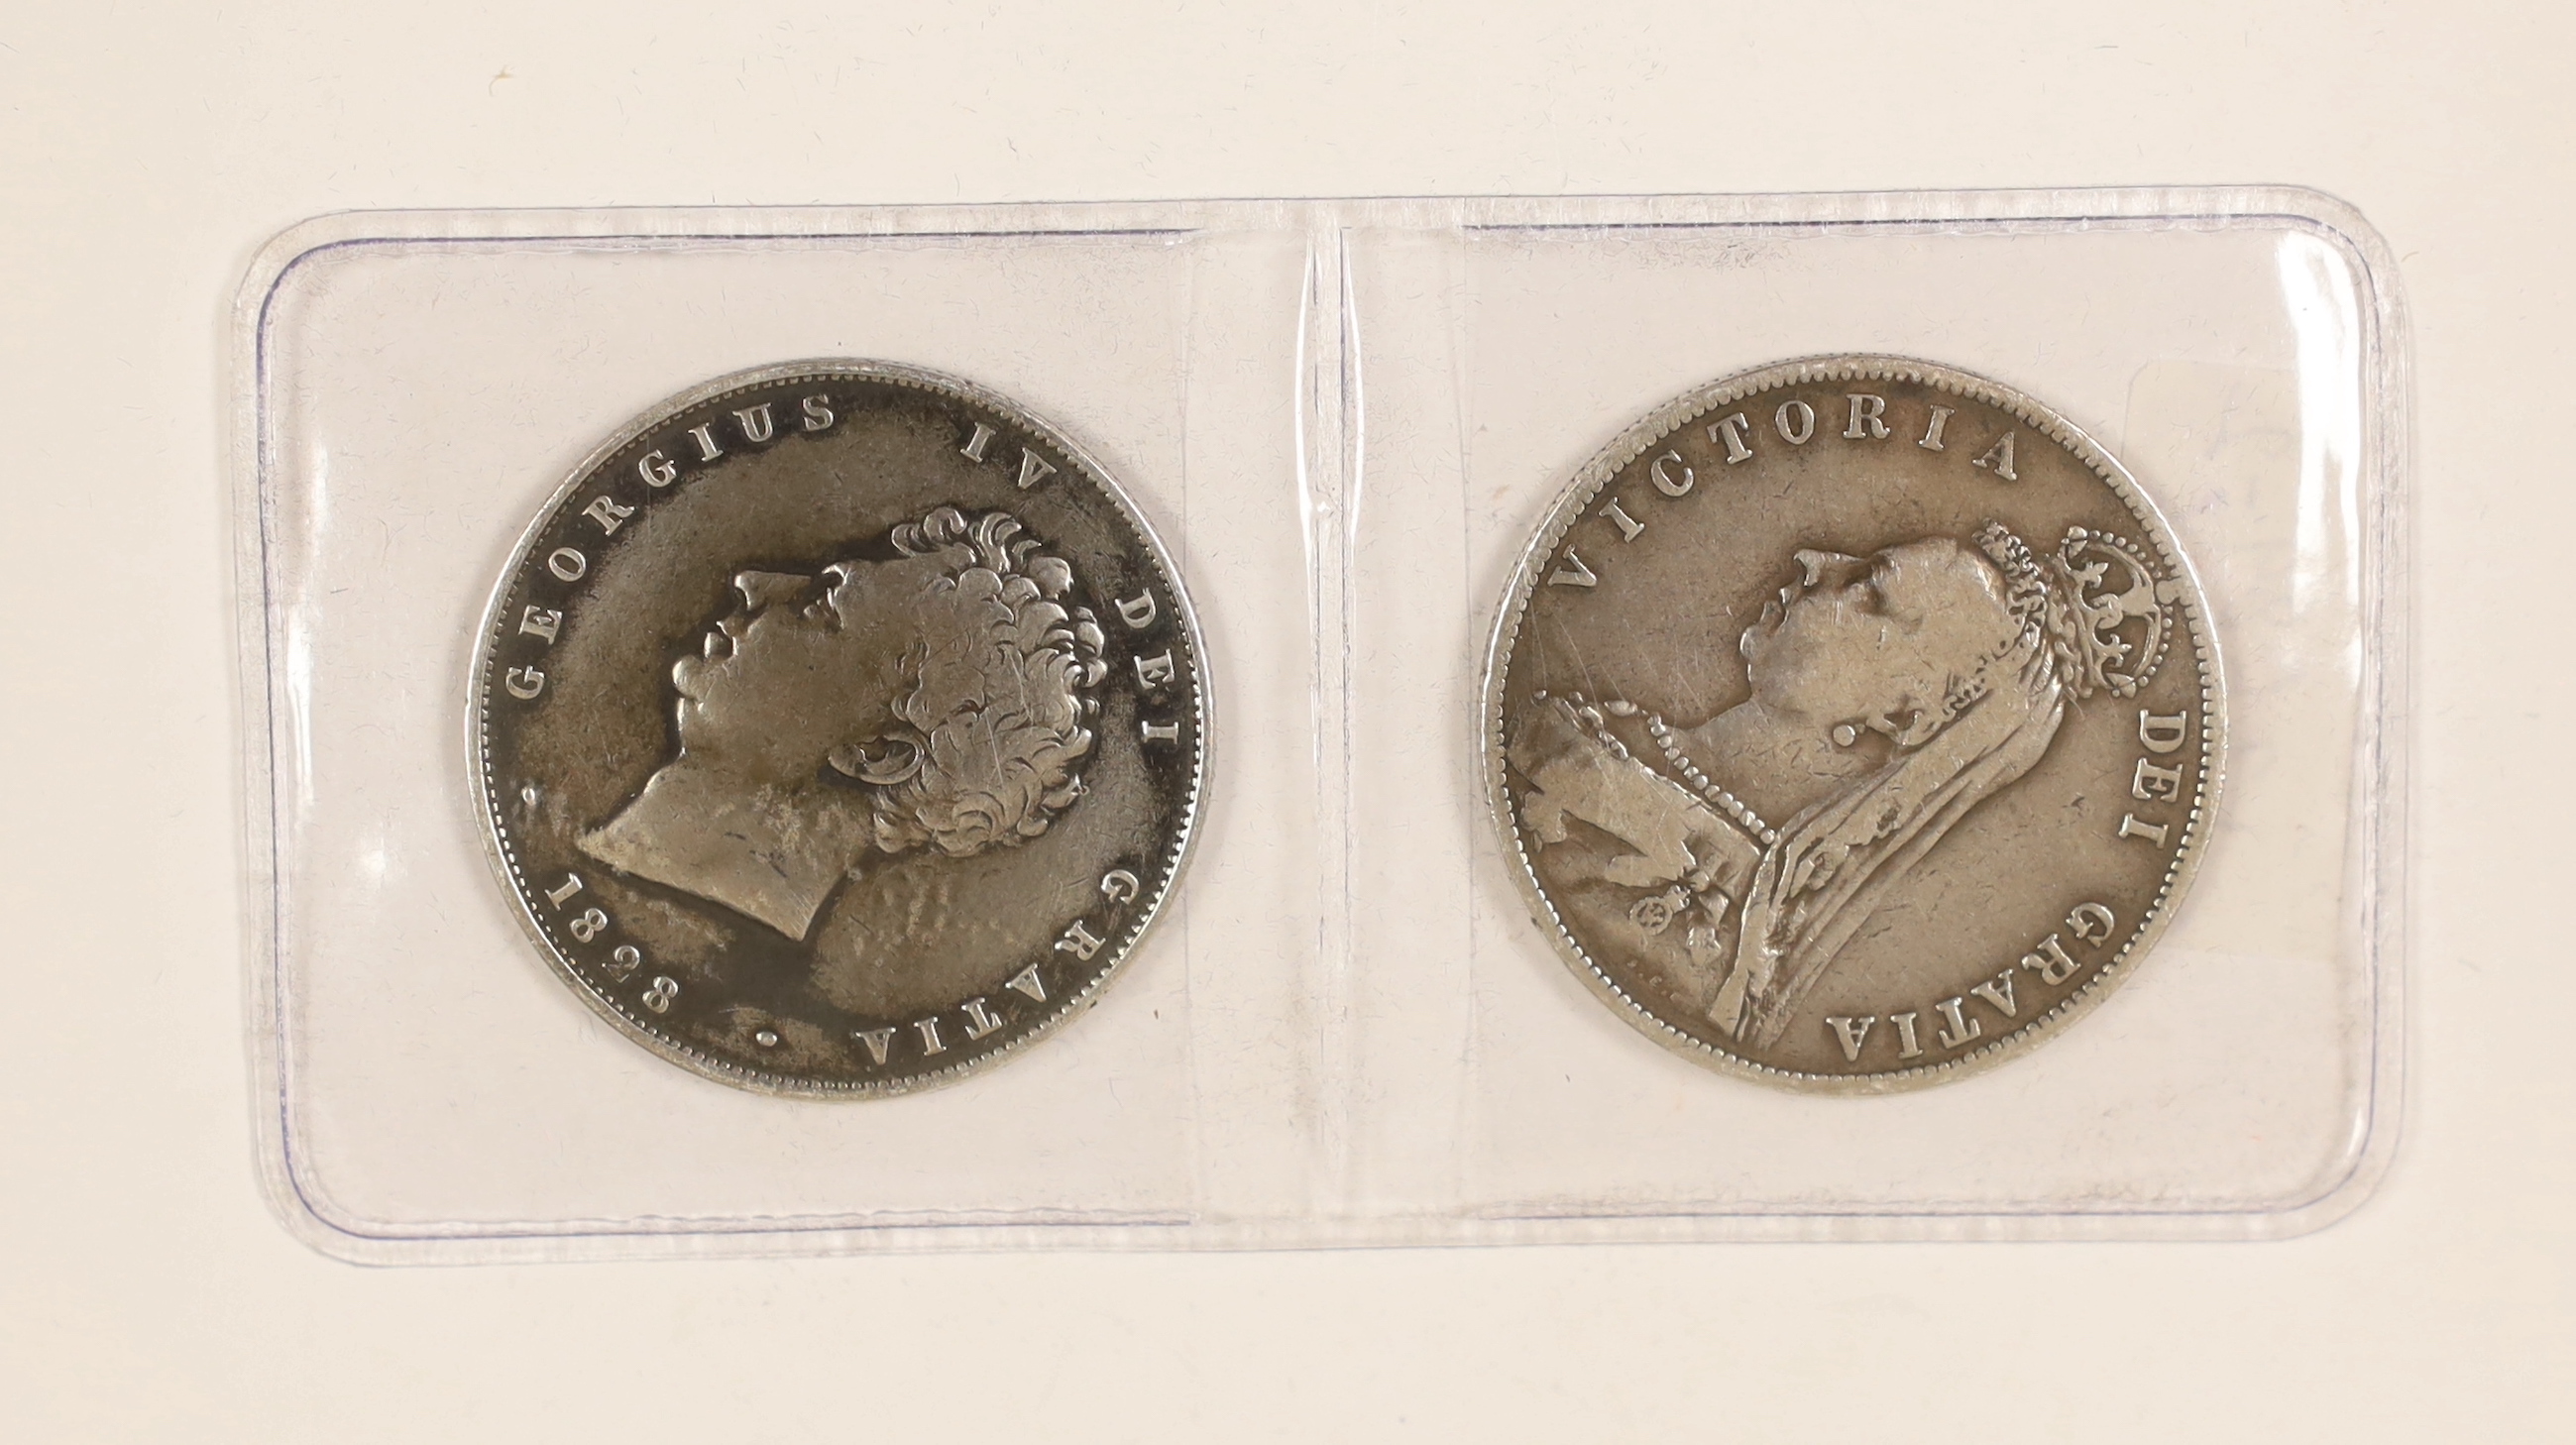 British silver coins, Two half crowns, 1828 and 1888